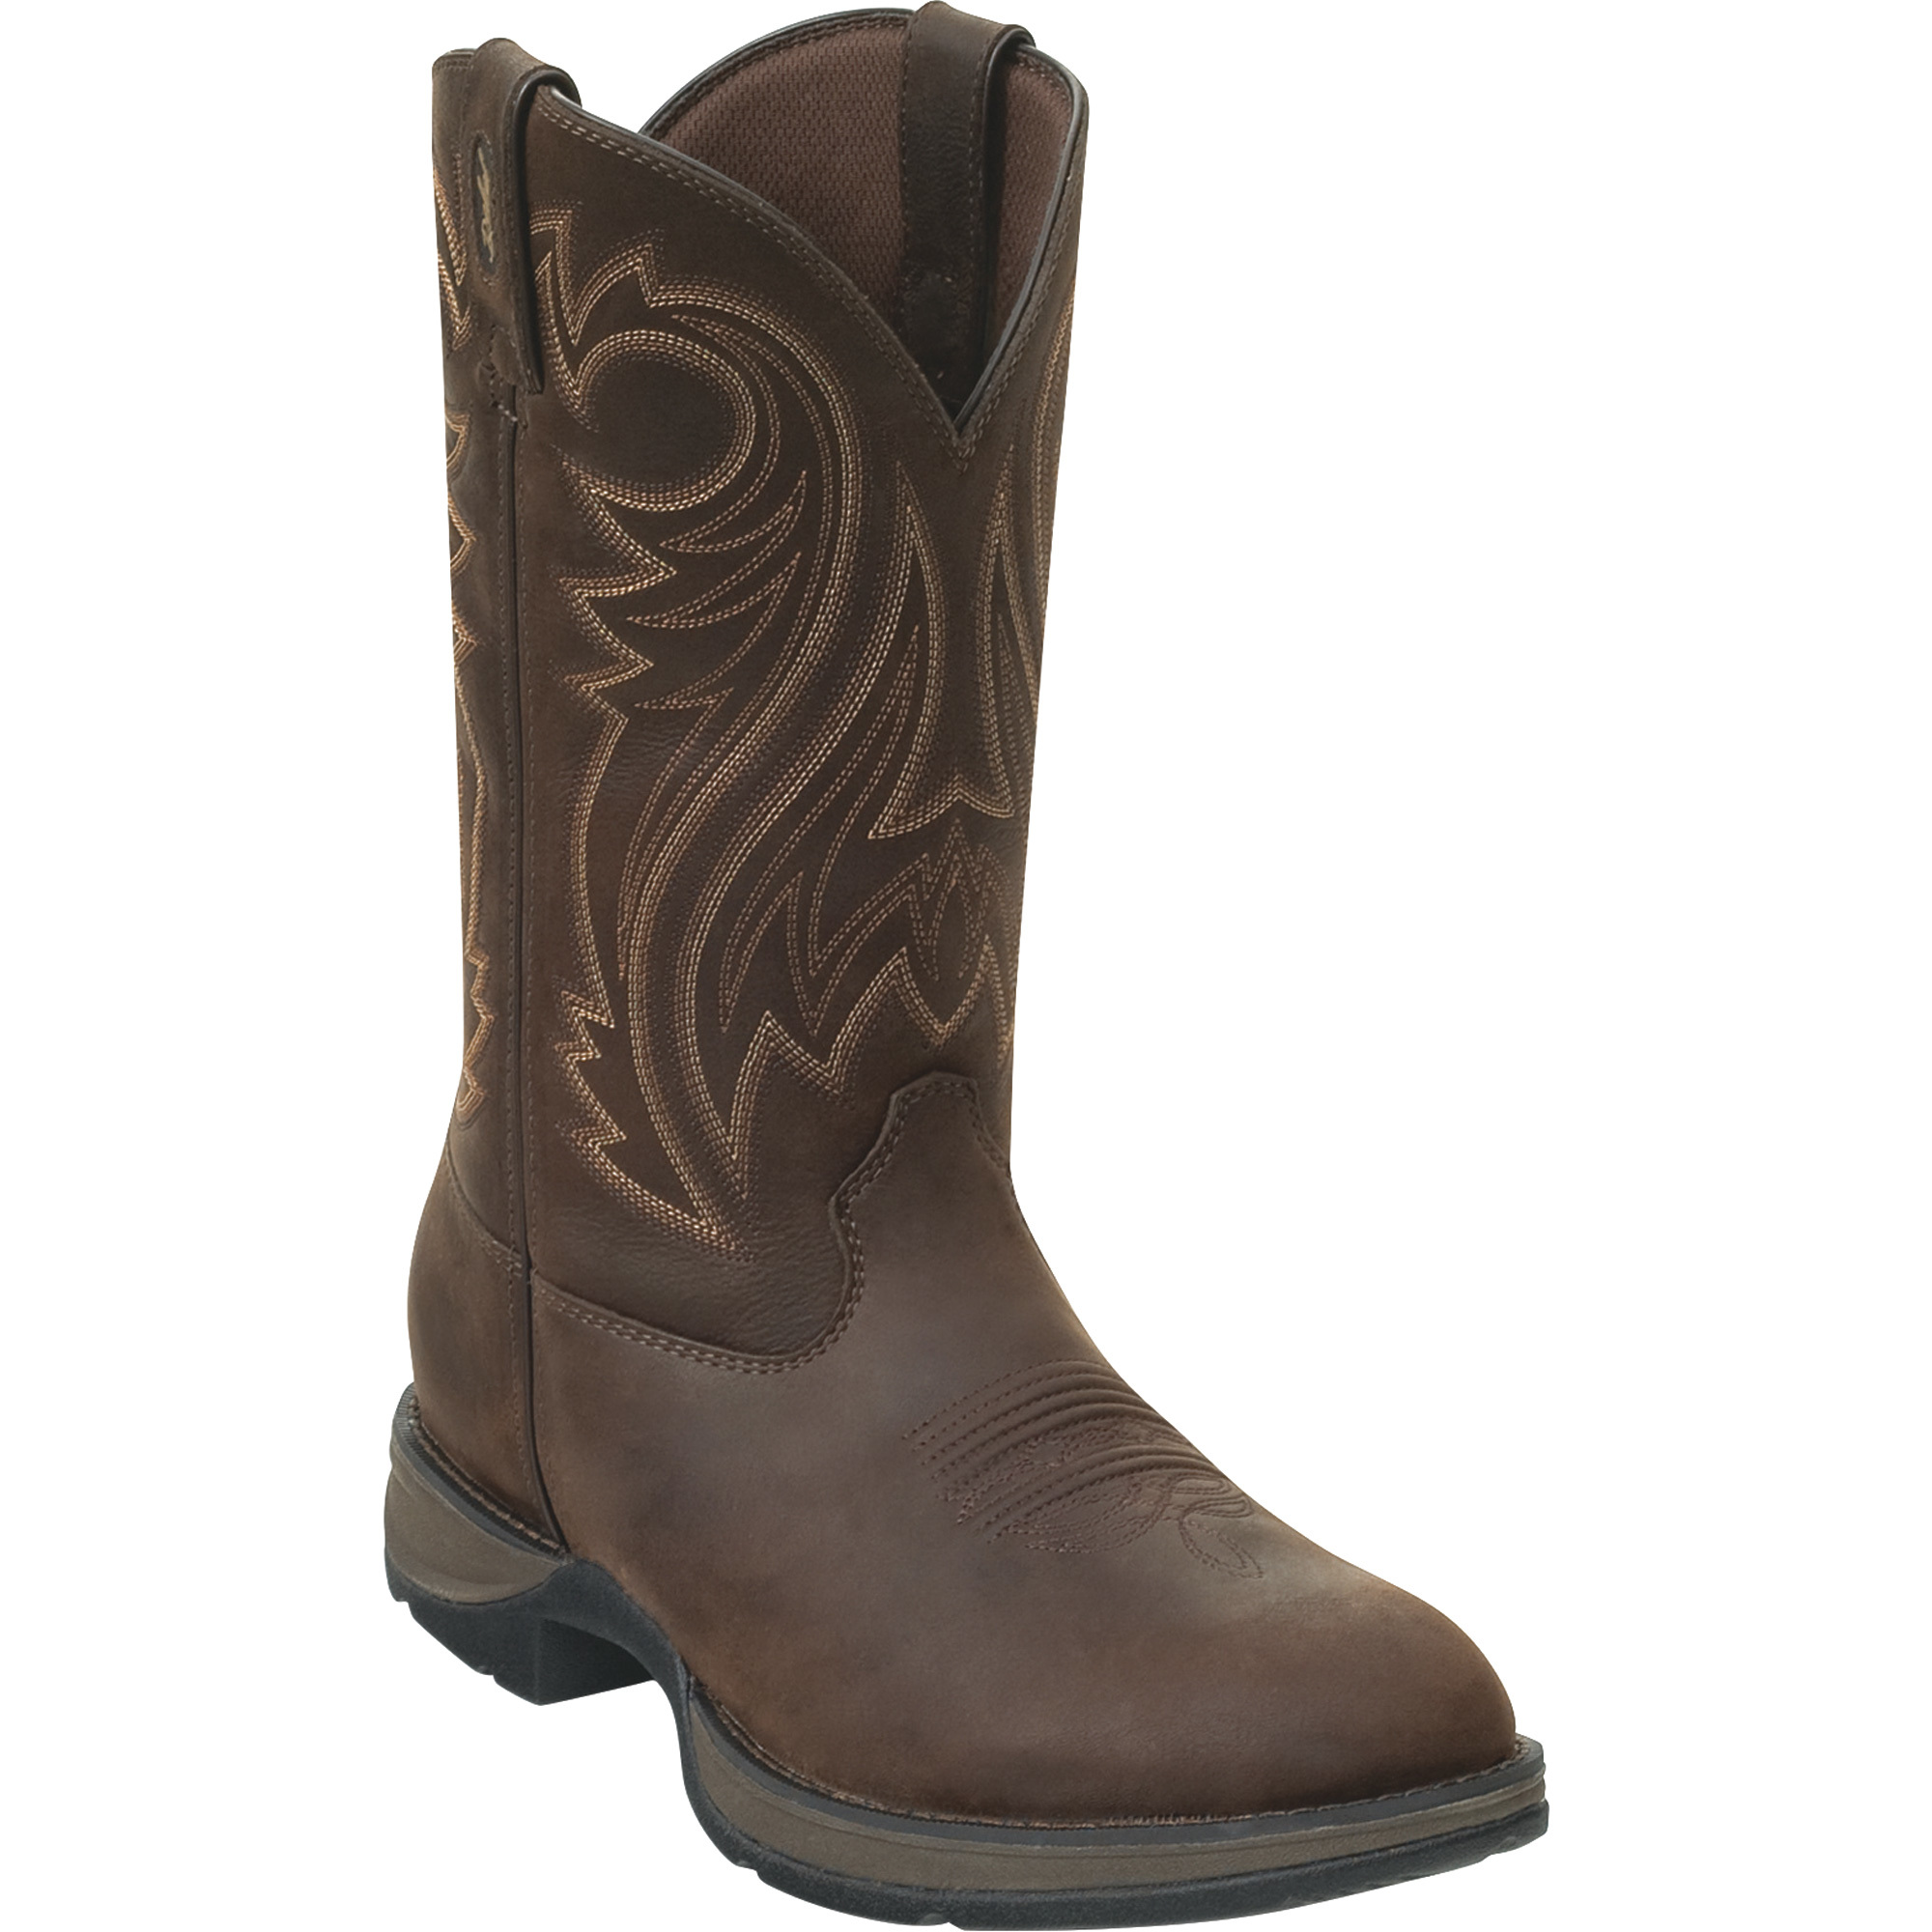 Durango Men's Rebel 12Inch Pull-On Western Work Boots - Chocolate, Size 10 1/2 Wide, Model DB 5464